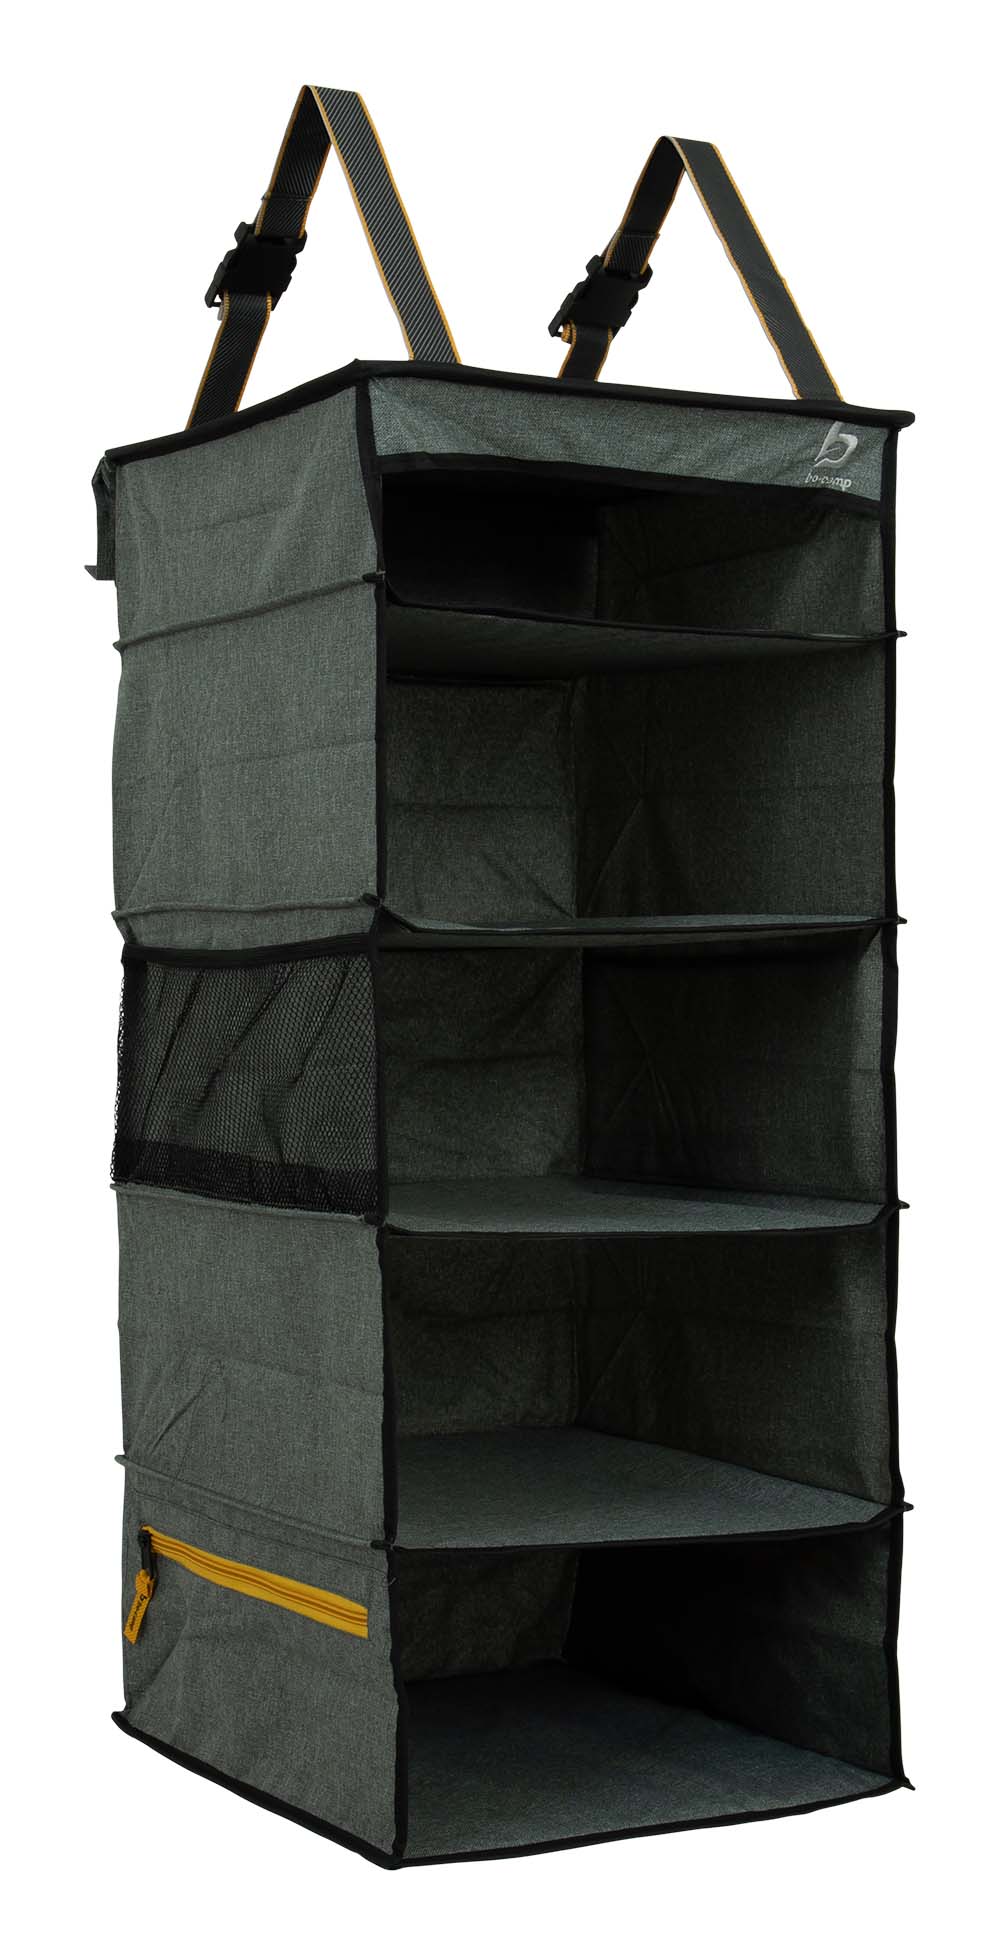 1709279 A 5 compartment hanging wardrobe from the Industrial collection. Has 5 compartments where you can optionally place a drawer (not included).  Includes 2 mesh side pockets and 2 zippered side pockets. This organiser can be hung with straps to a tent pole. The loops at the bottom provide additional fixation. Made of extra sturdy Cationic.